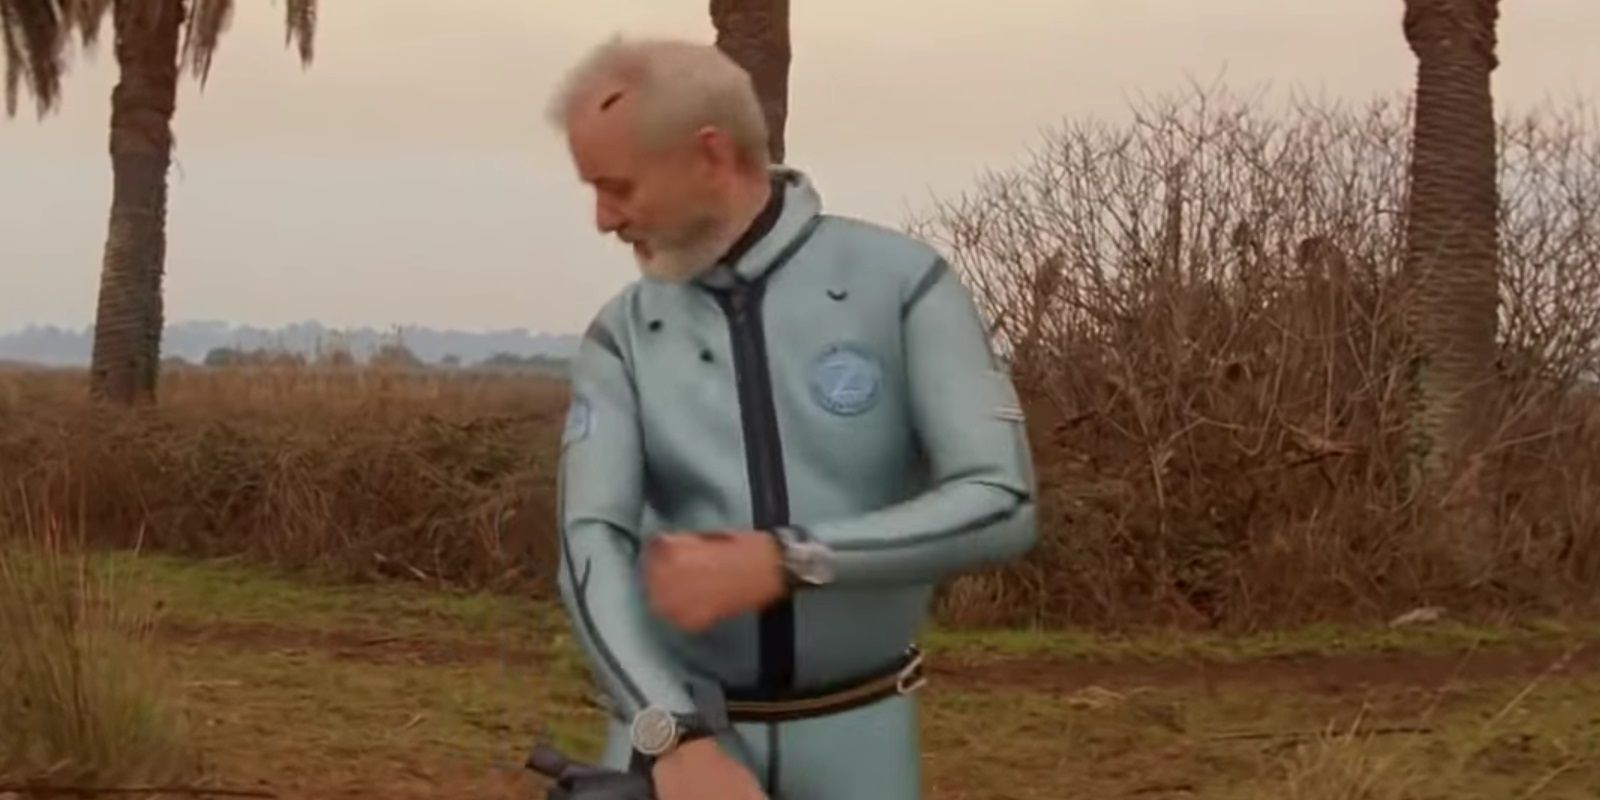 Steve covered in swamp leeches in The Life Aquatic.